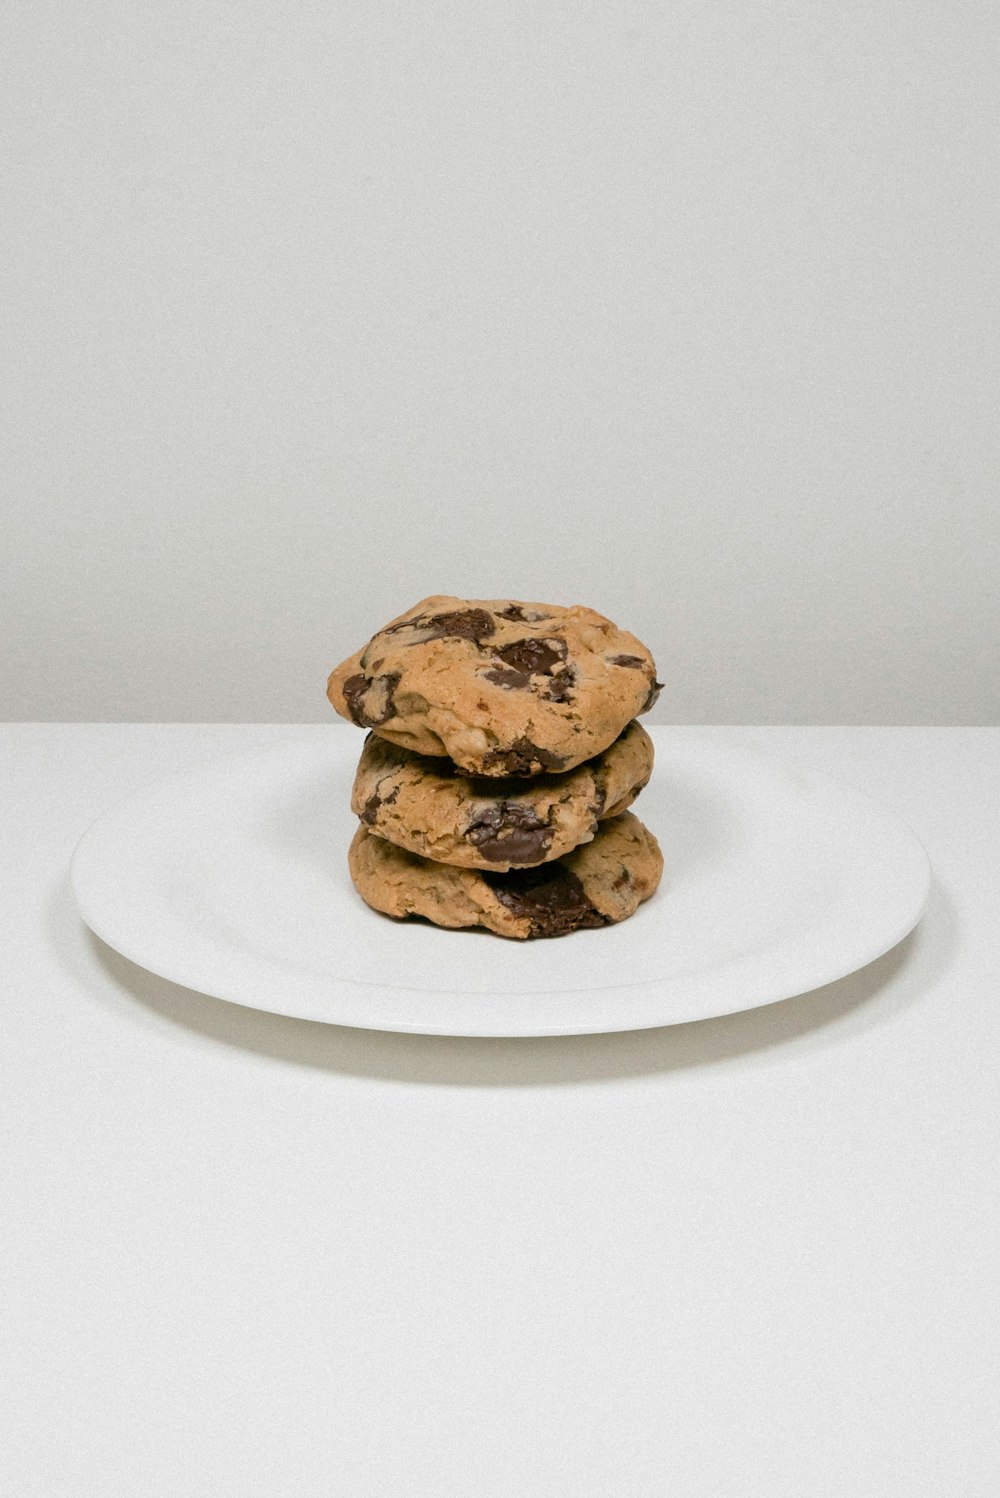 a stack of chocolate chip cookies on a white plate